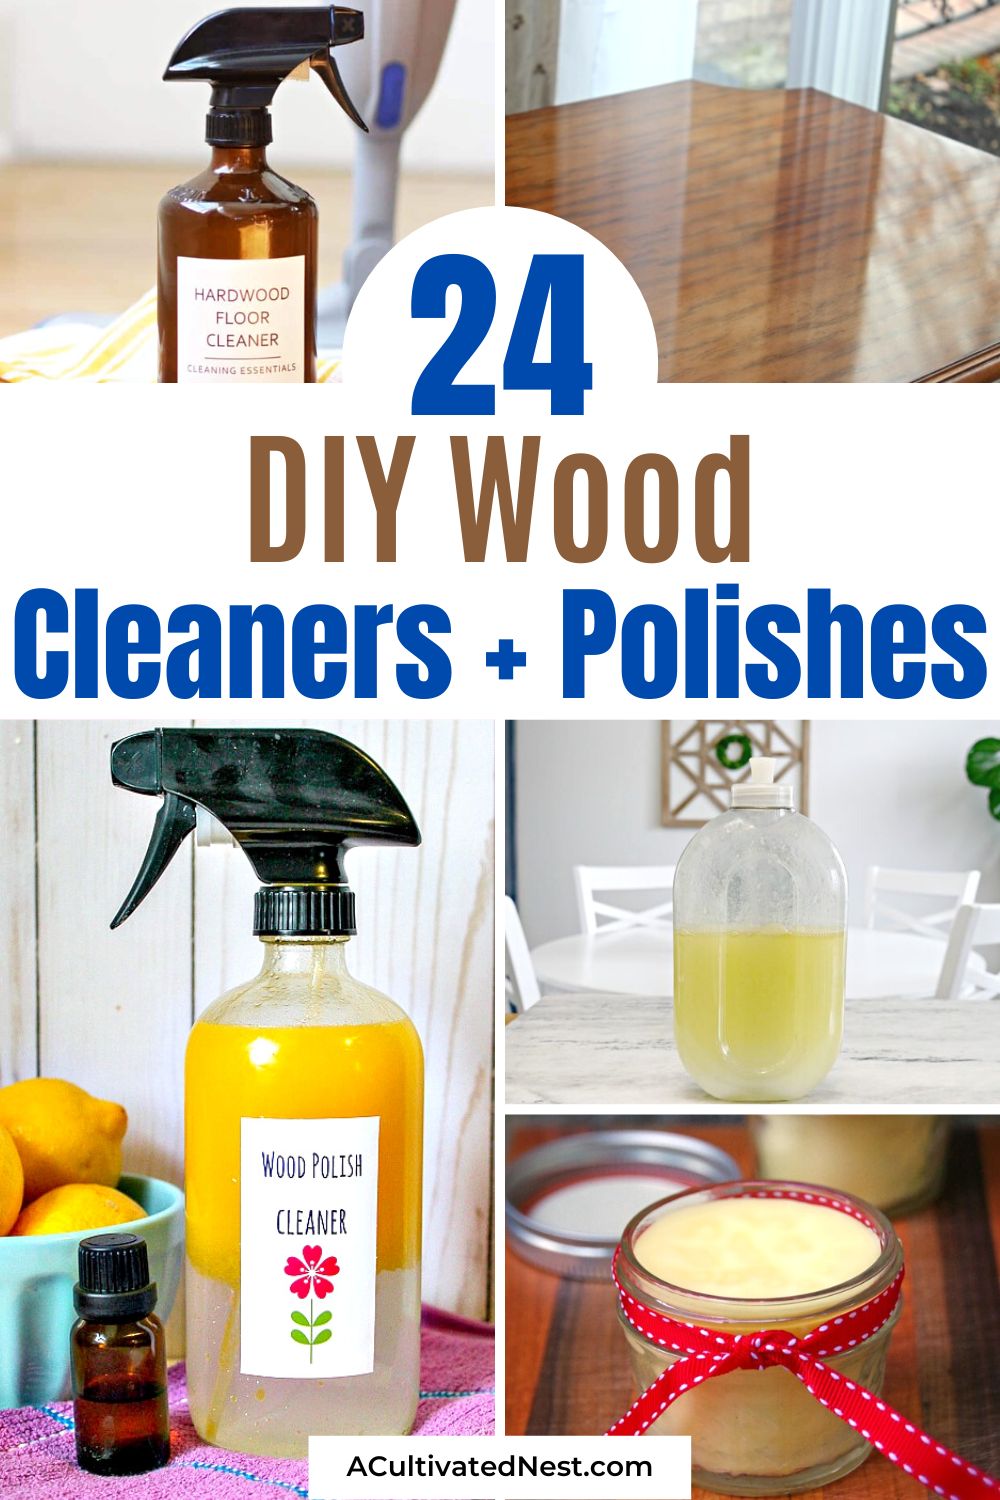 24 DIY Wood Cleaners and Wood Polishes- Transform your wooden furniture into stunning pieces with these DIY wood cleaners and wood polishes. Whether you're dealing with scratches, water stains, or simply lackluster surfaces, this post provides an array of effective solutions. | how to clean hardwood floors, how to clean wood furniture, #homemadeCleaningProducts #DIYCleaning #woodCleaner #woodPolish #ACultivatedNest